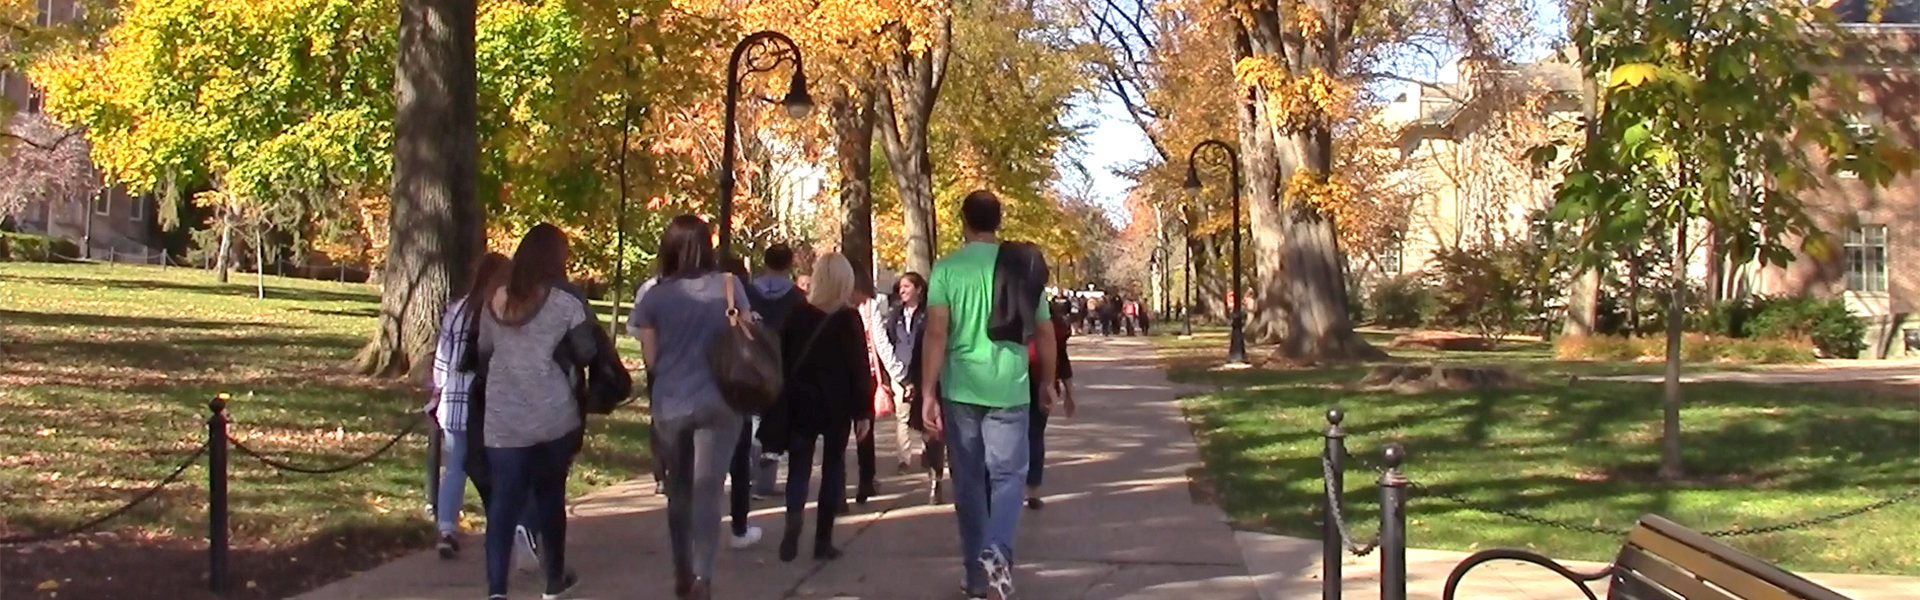 students walking across Penn State campus